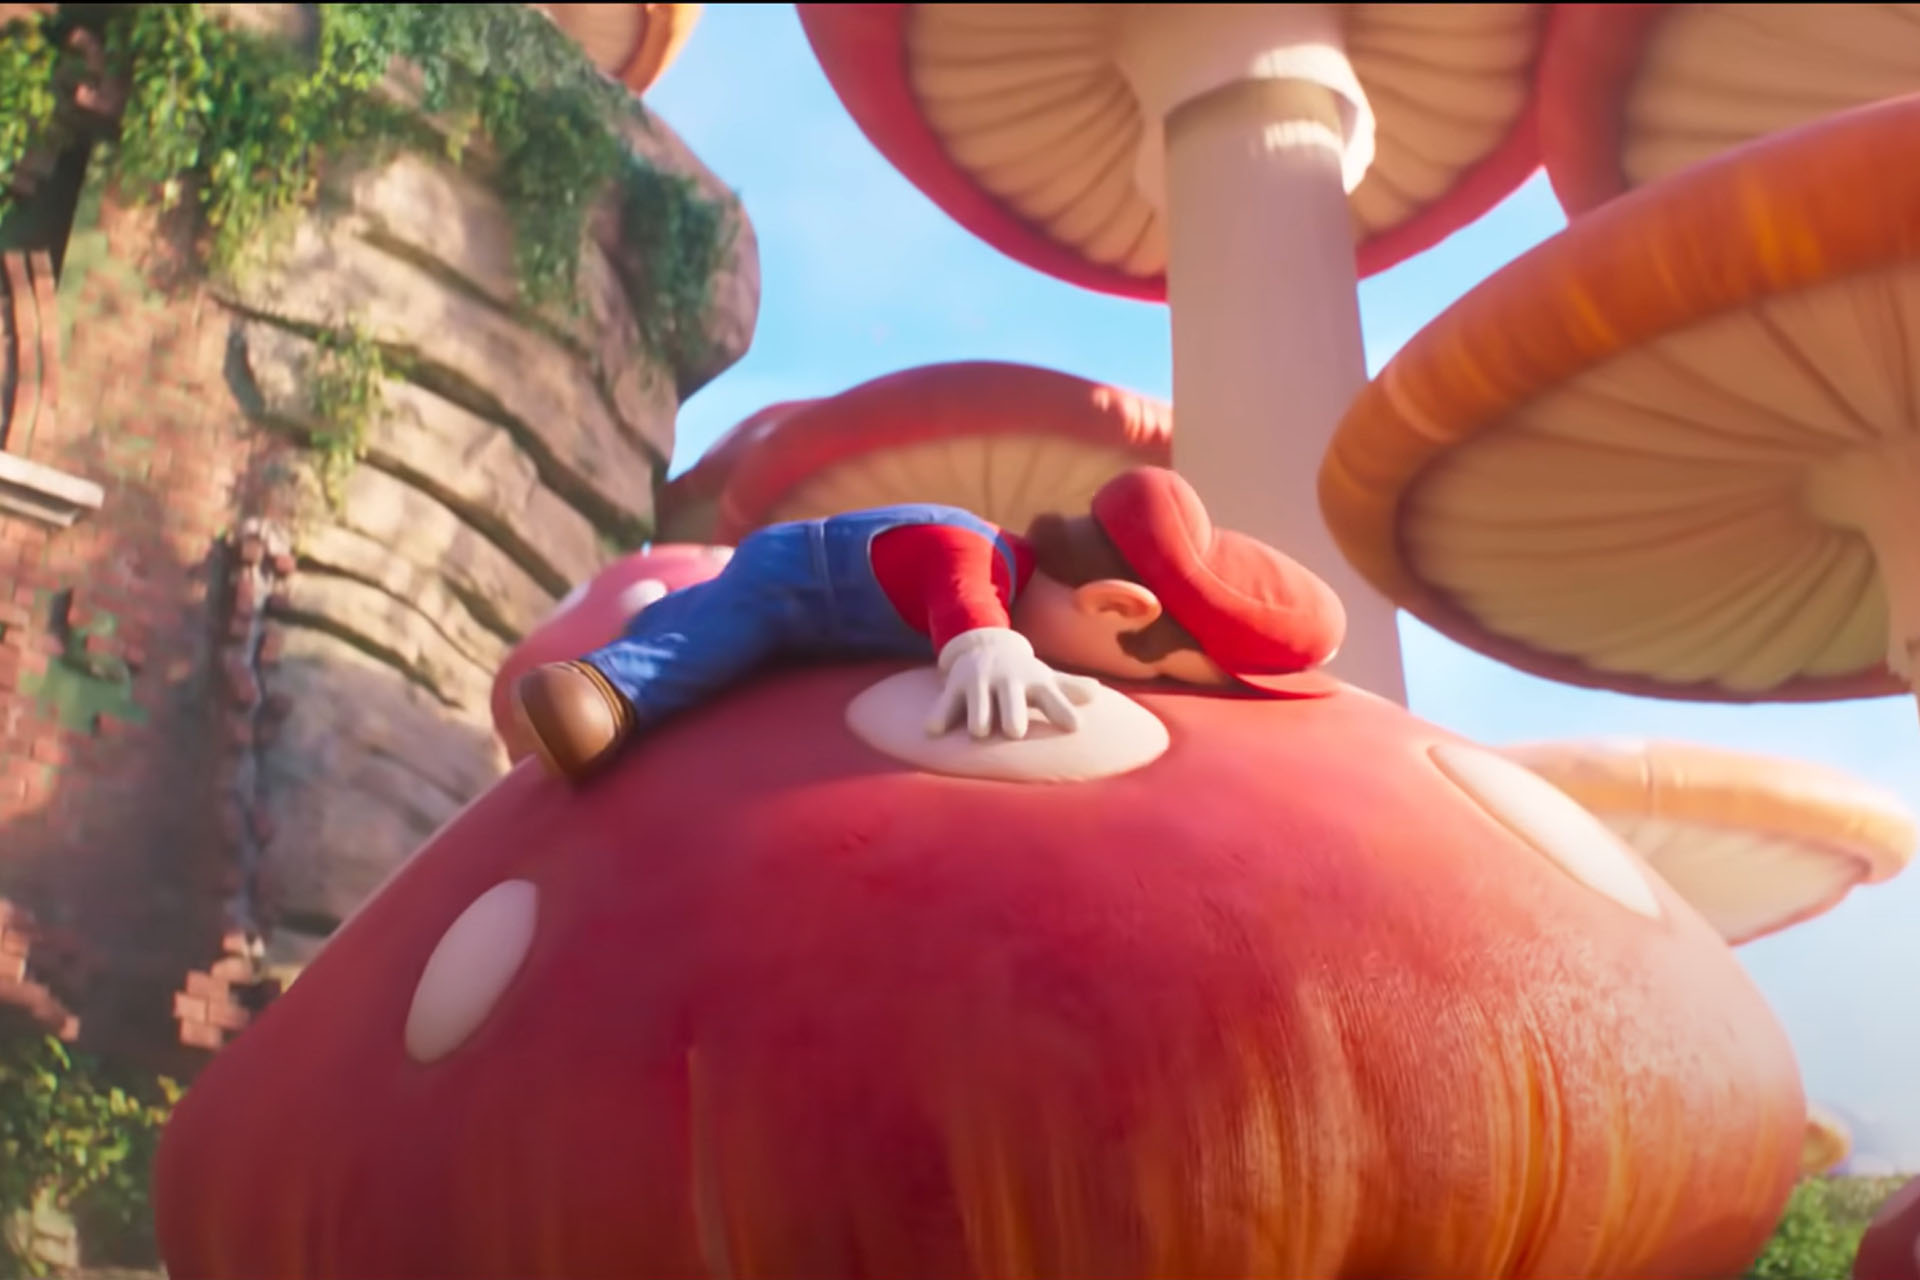 A shot of Mario from the new Mario Movie facedown on a mushroom